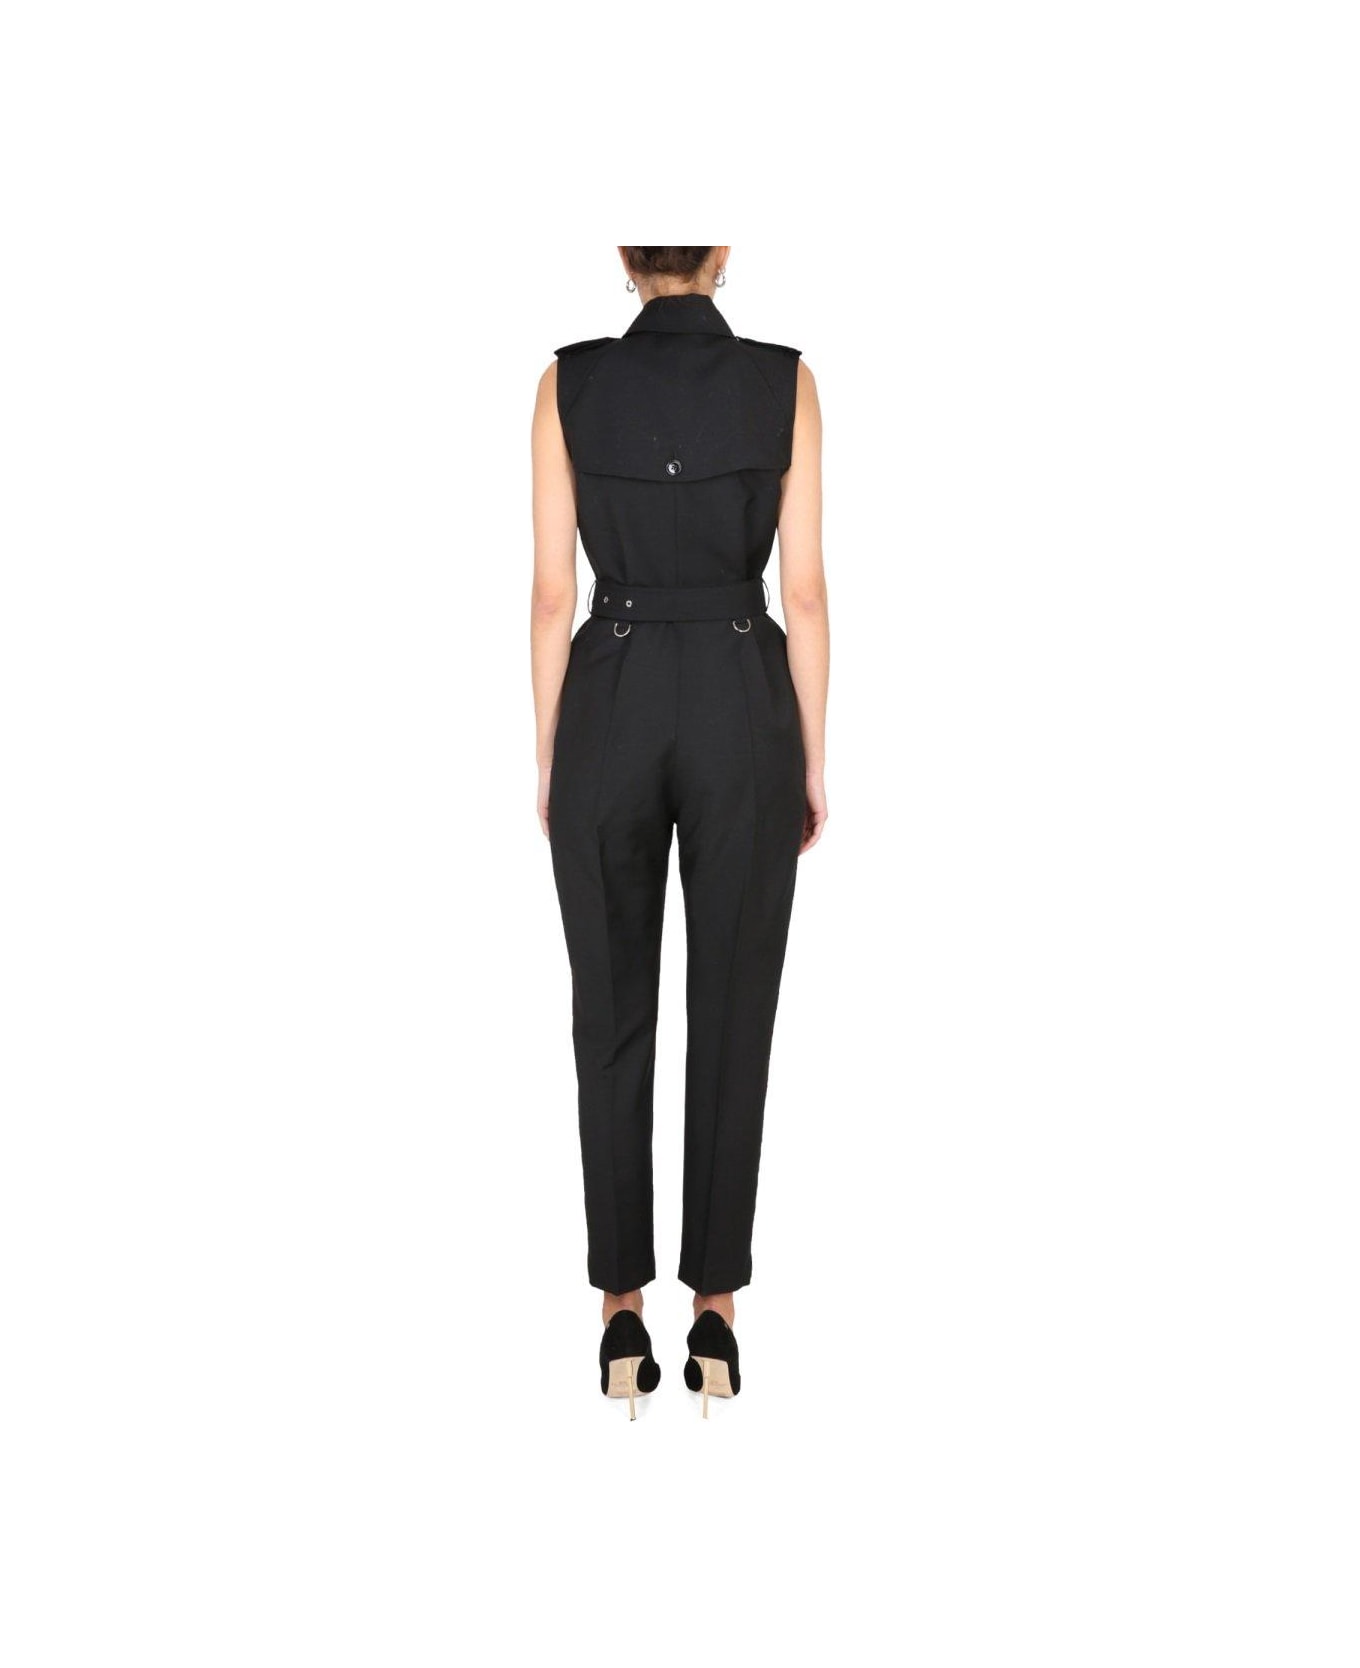 Burberry Double Breasted Belted Waist Overalls - BLACK